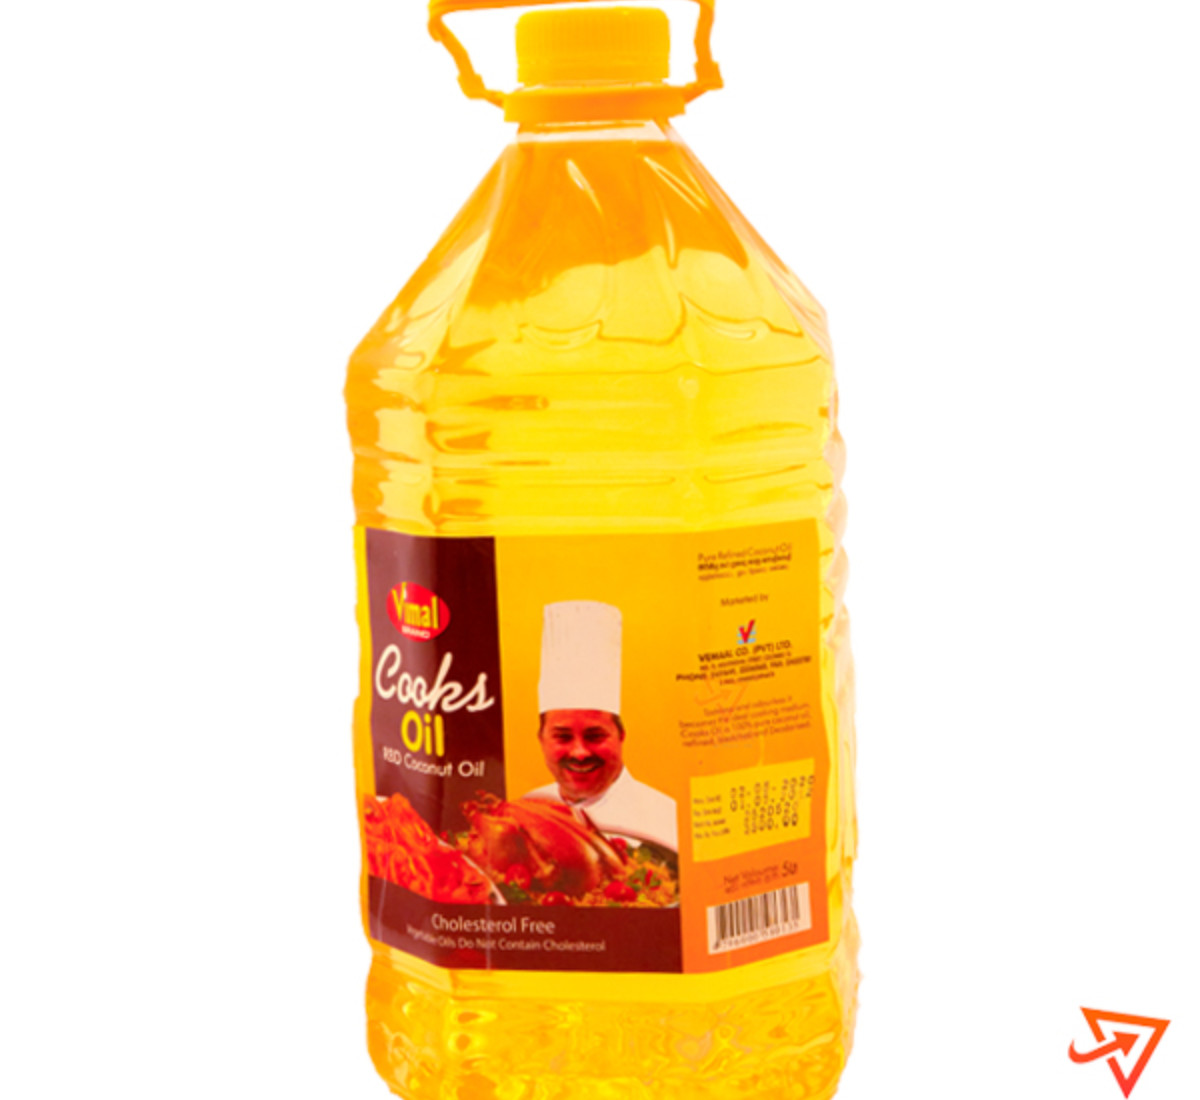 Clicker product 5L   VIMAL  cooking oil 883